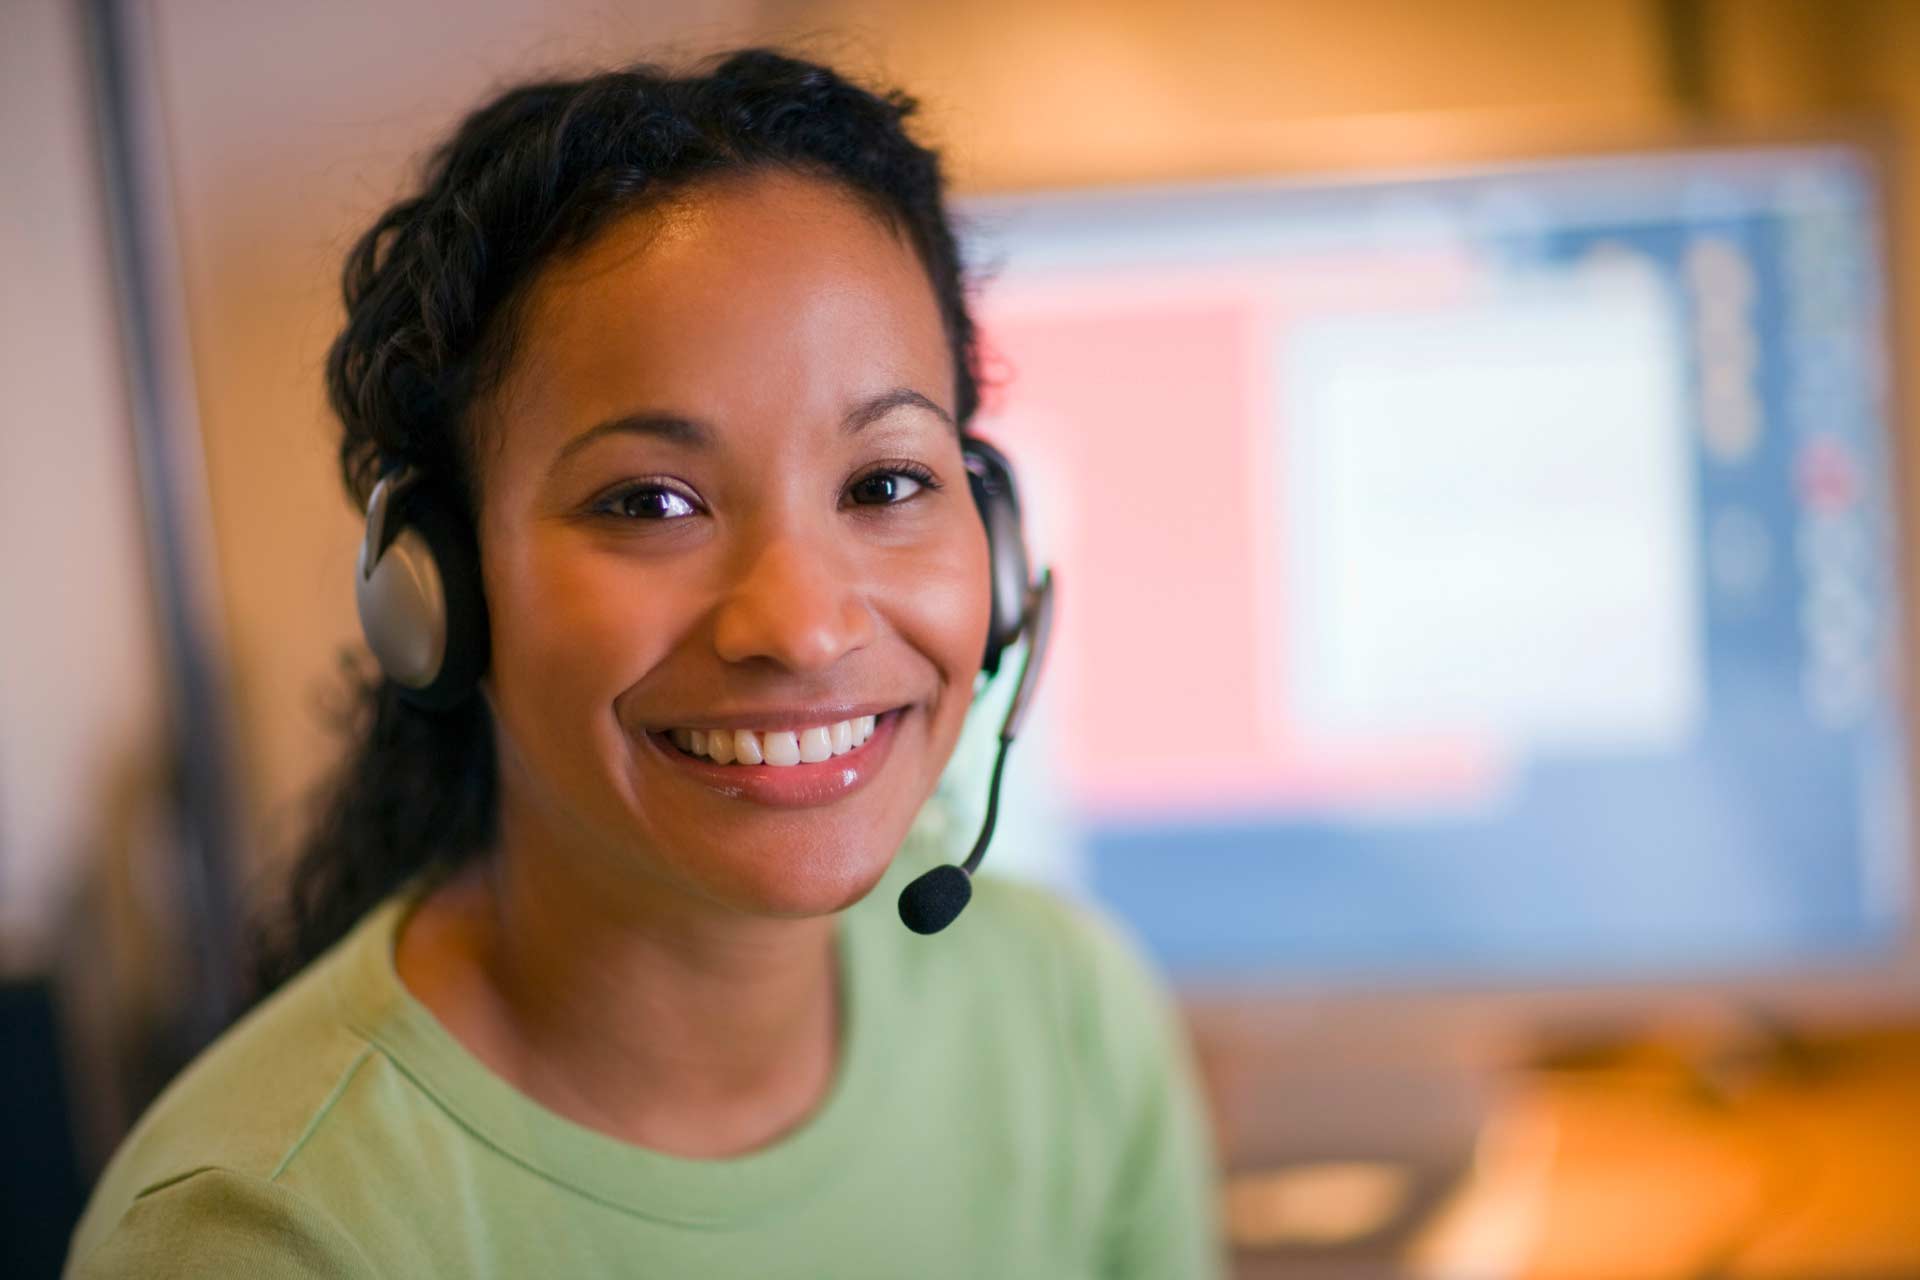 Smiling nurse with a phone headset on, ready to answer callers’ medical marijuana questions.